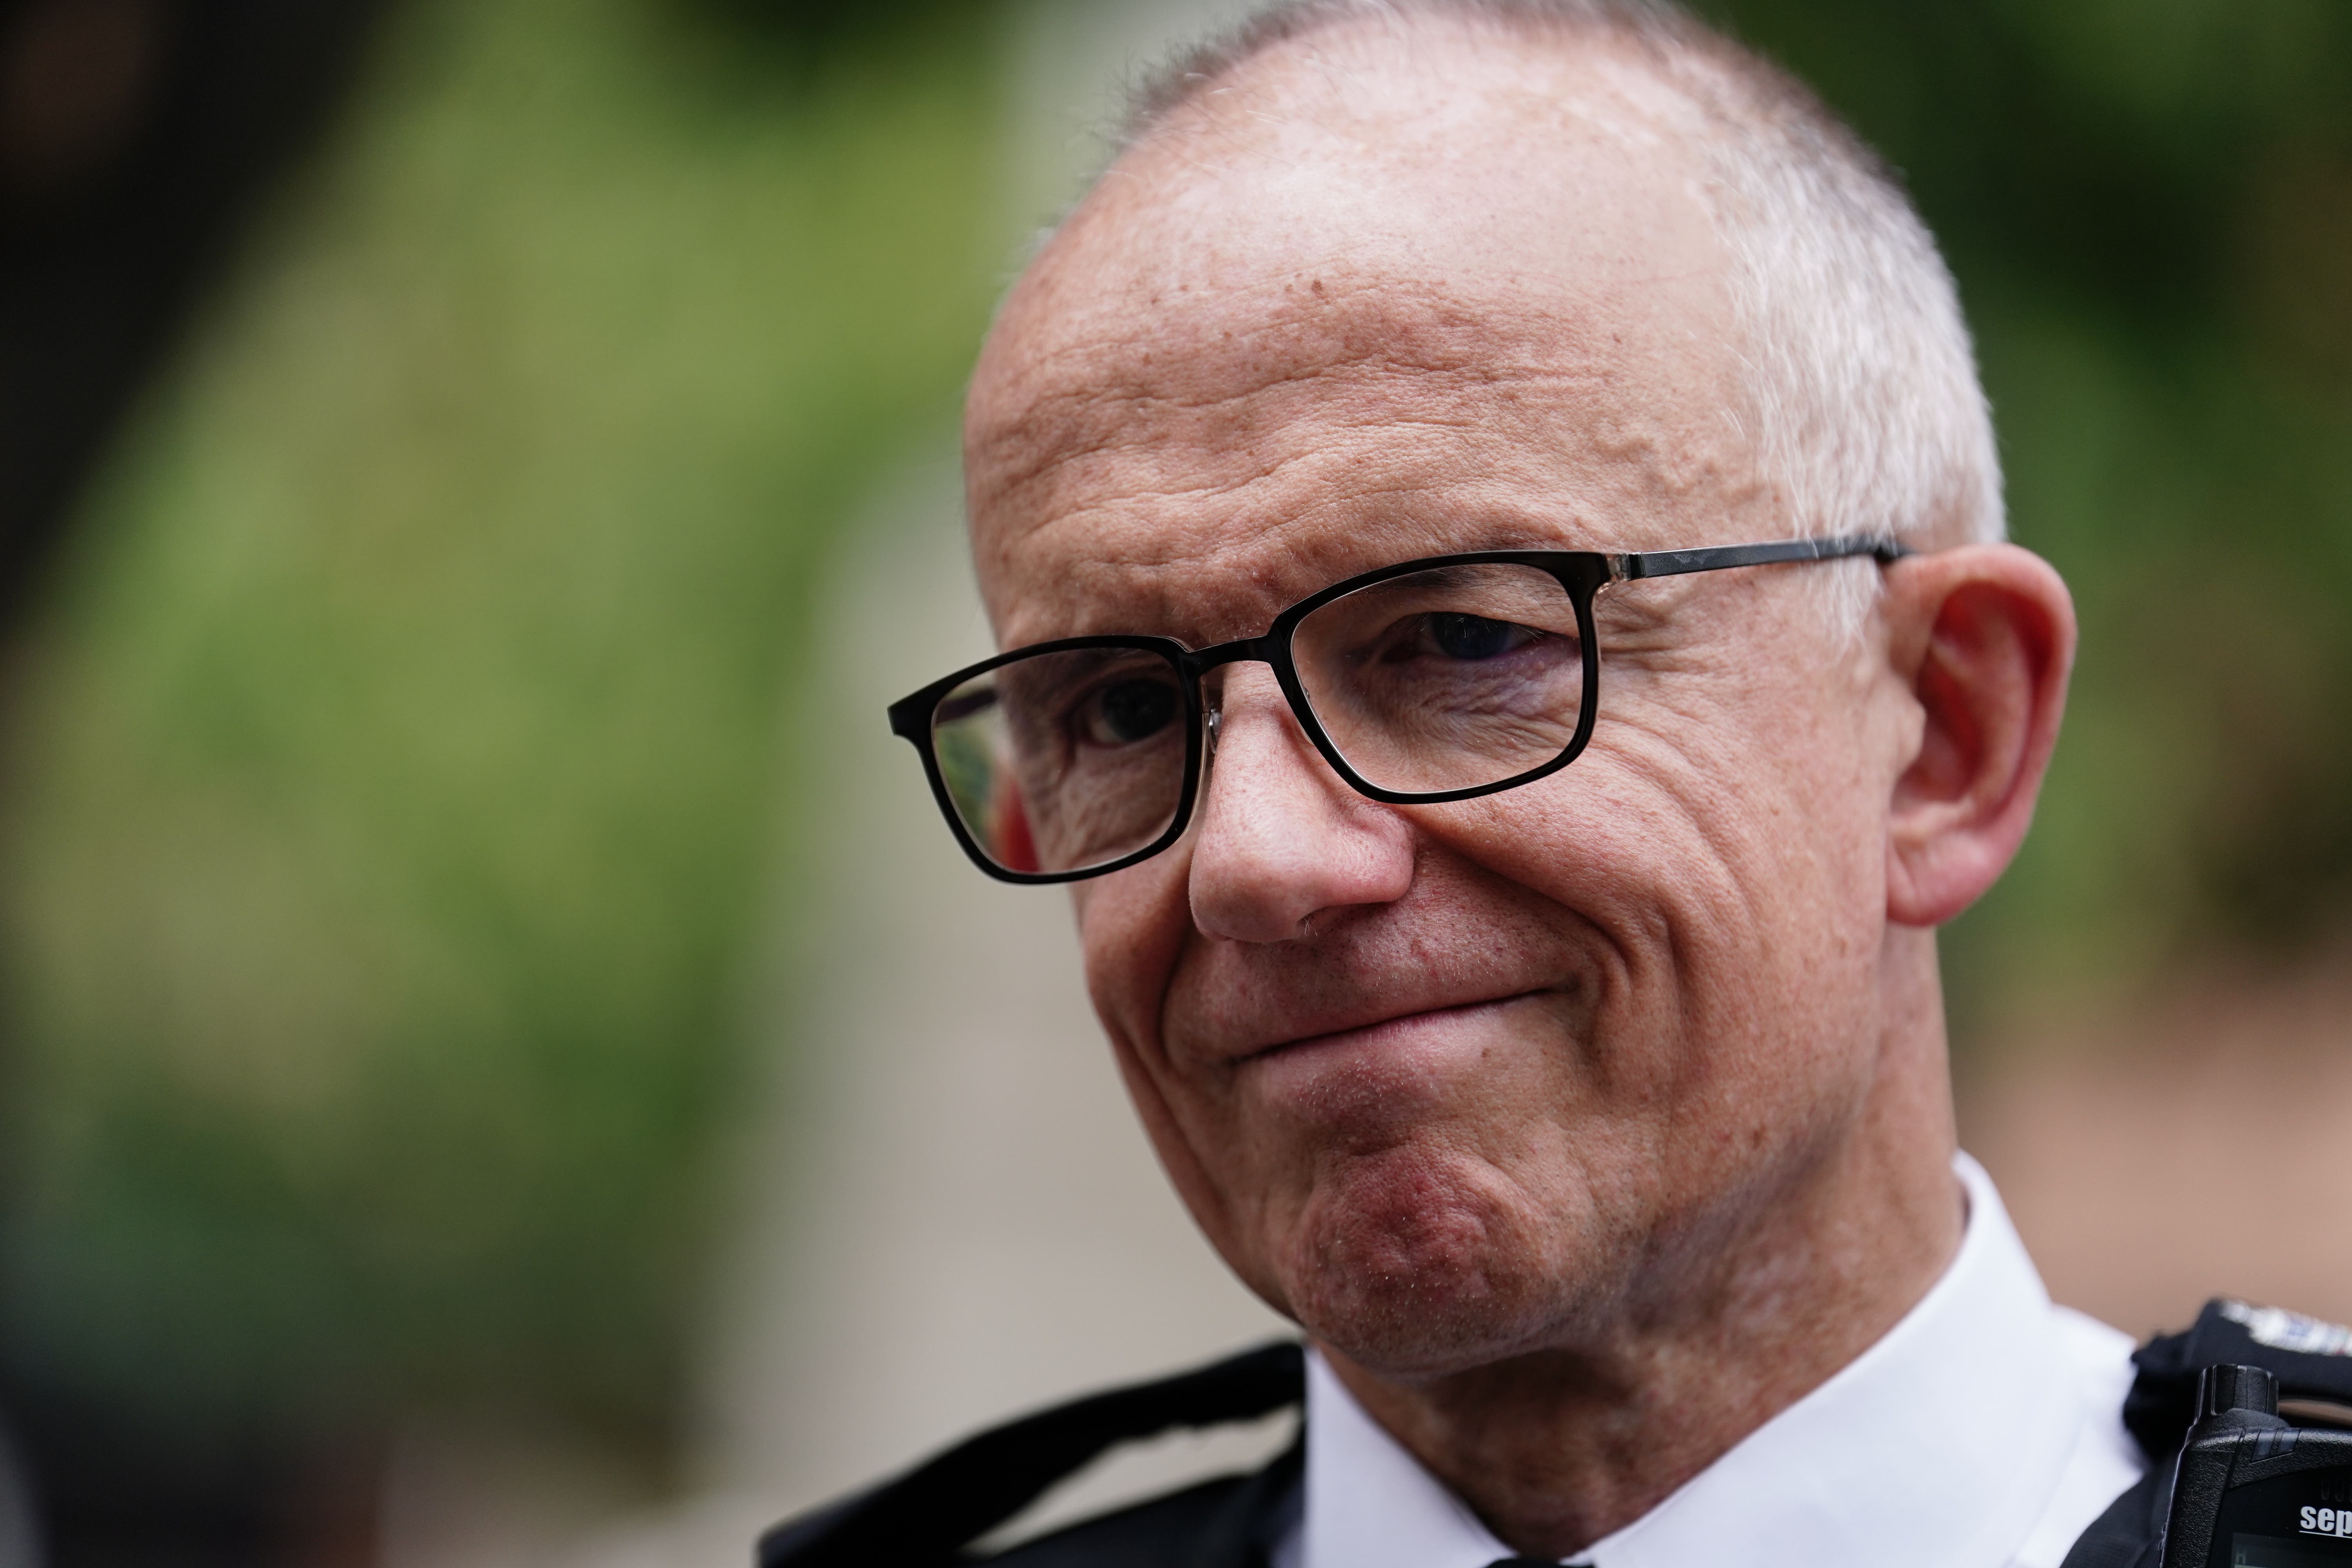 Sir Mark Rowley told NHS partners the Met Police would be reducing its mental health response by September, but was forced to extend the deadline (Jordan Pettitt/PA)